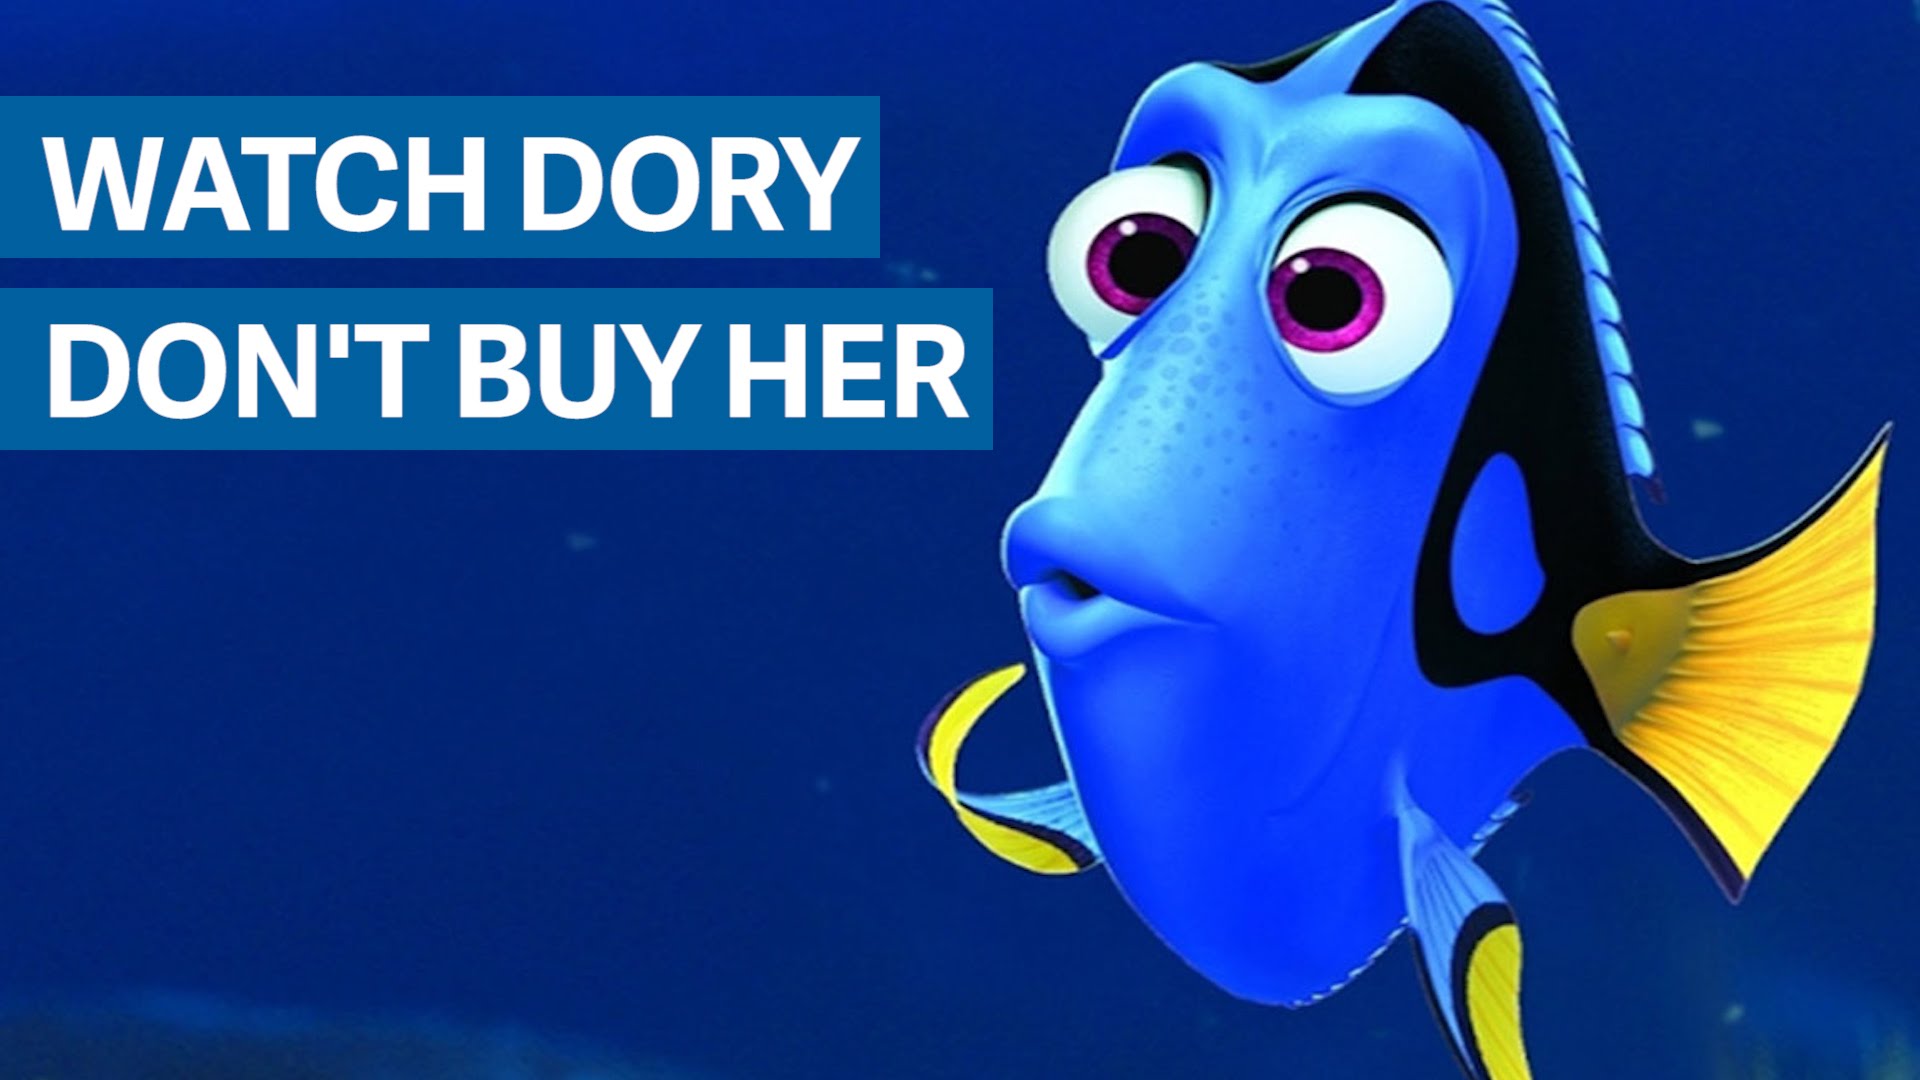 Watch Dory, don't buy her - YouTube